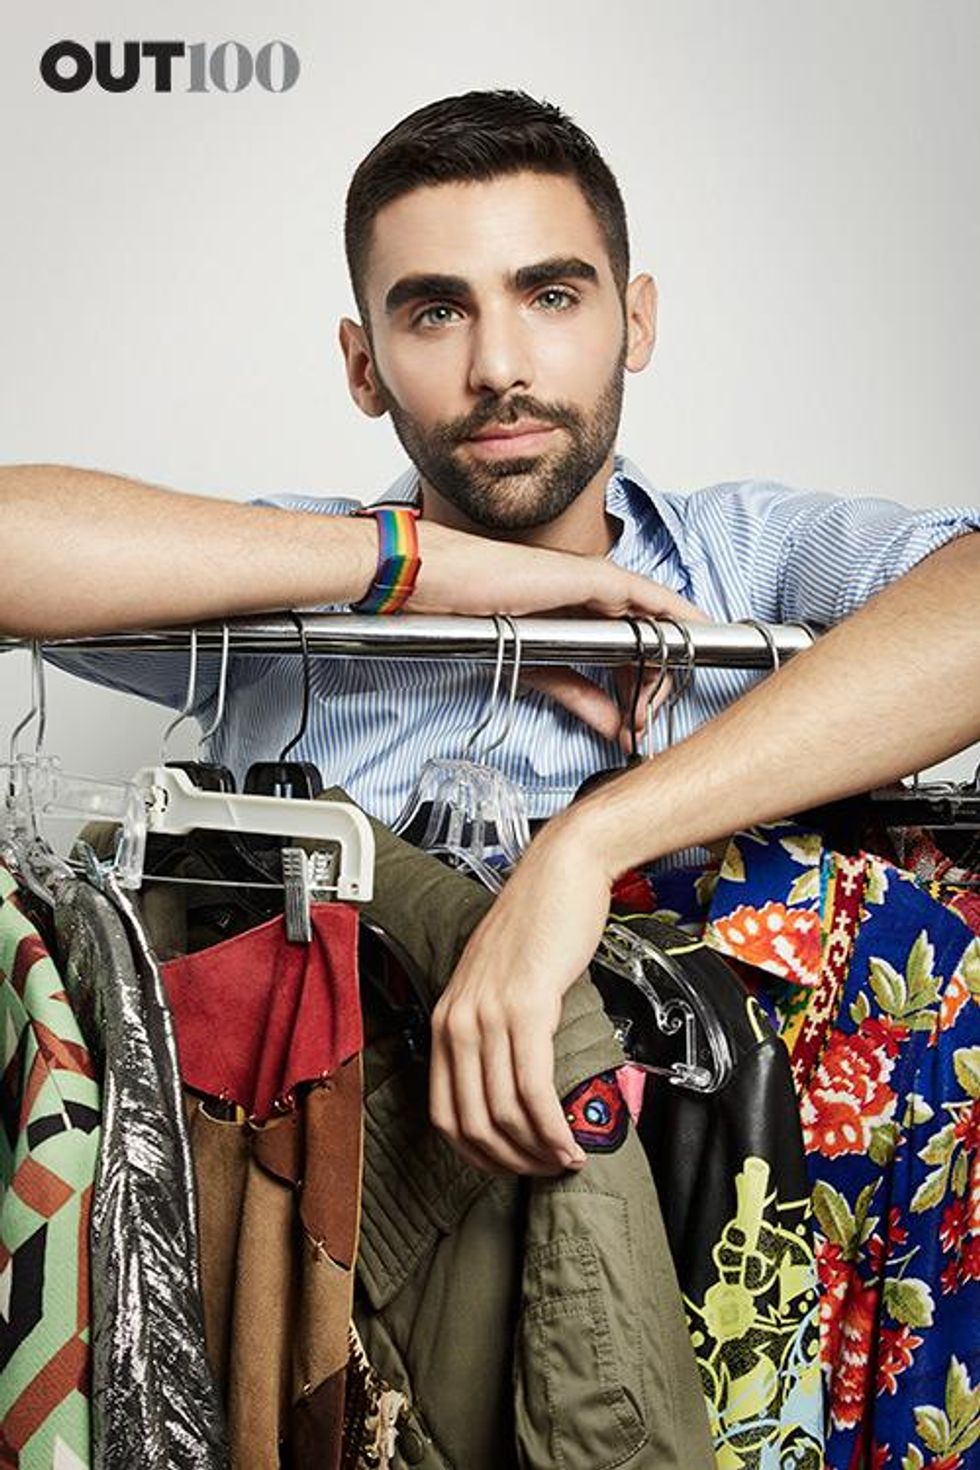 OUT100: Phillip Picardi, Journalist, Editor